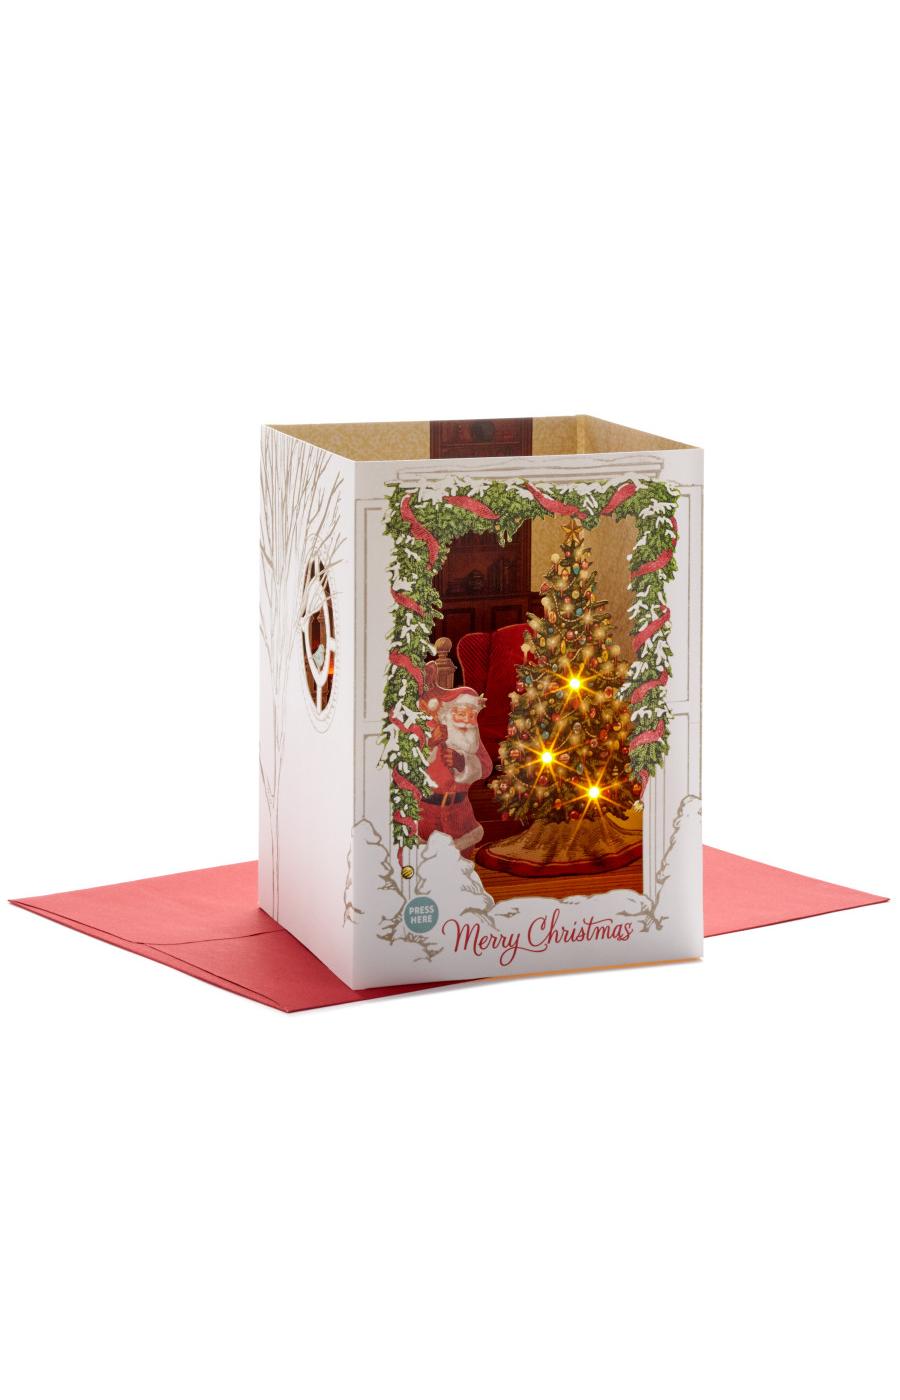 Shop Hallmark's Best-Selling Christmas Card Box for $15 on